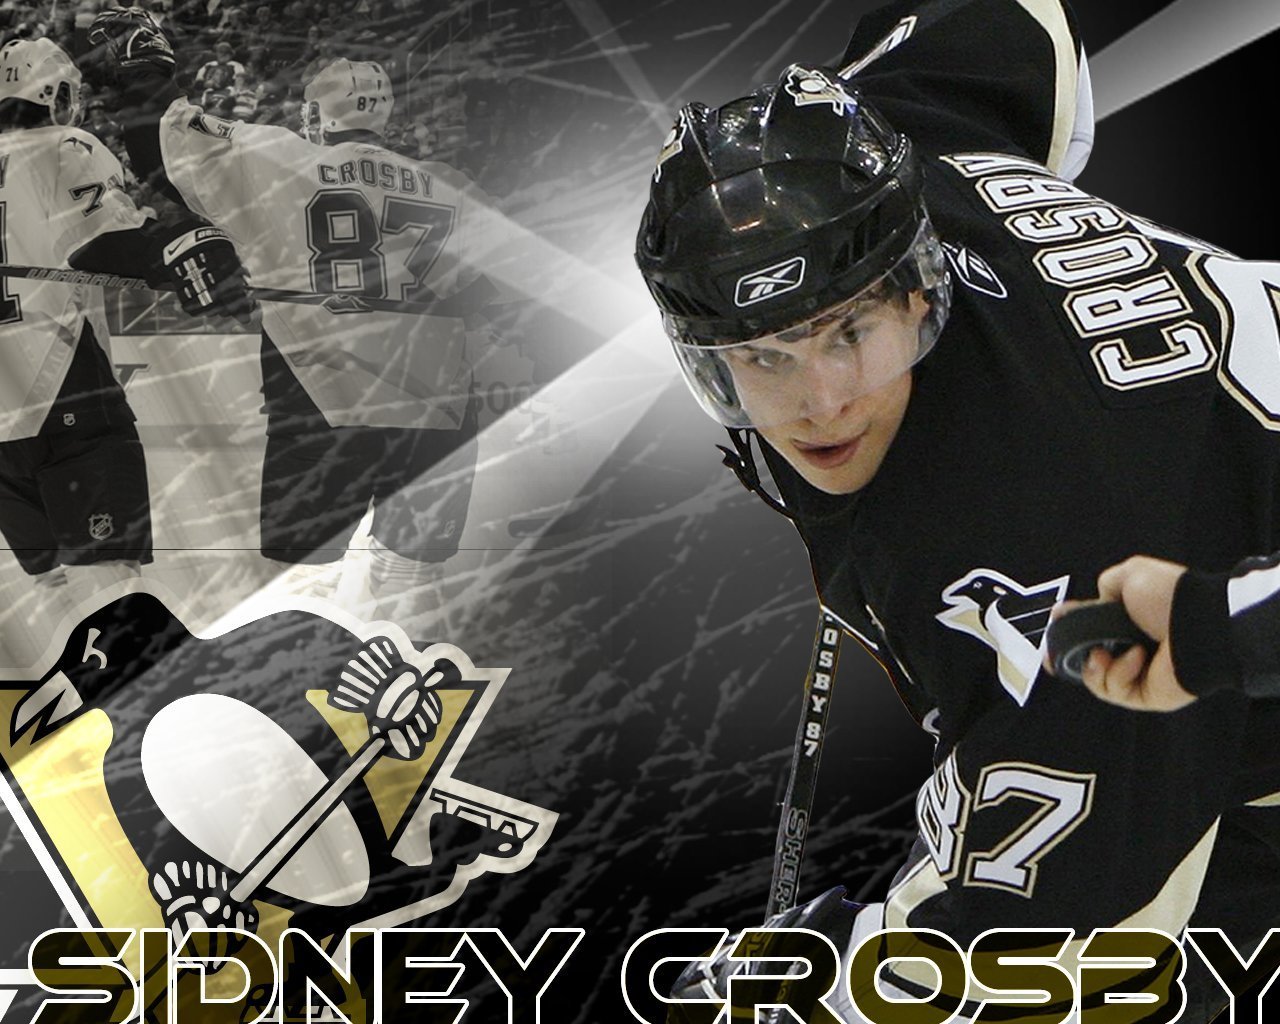 Sidney Crosby images Crosby HD wallpaper and background